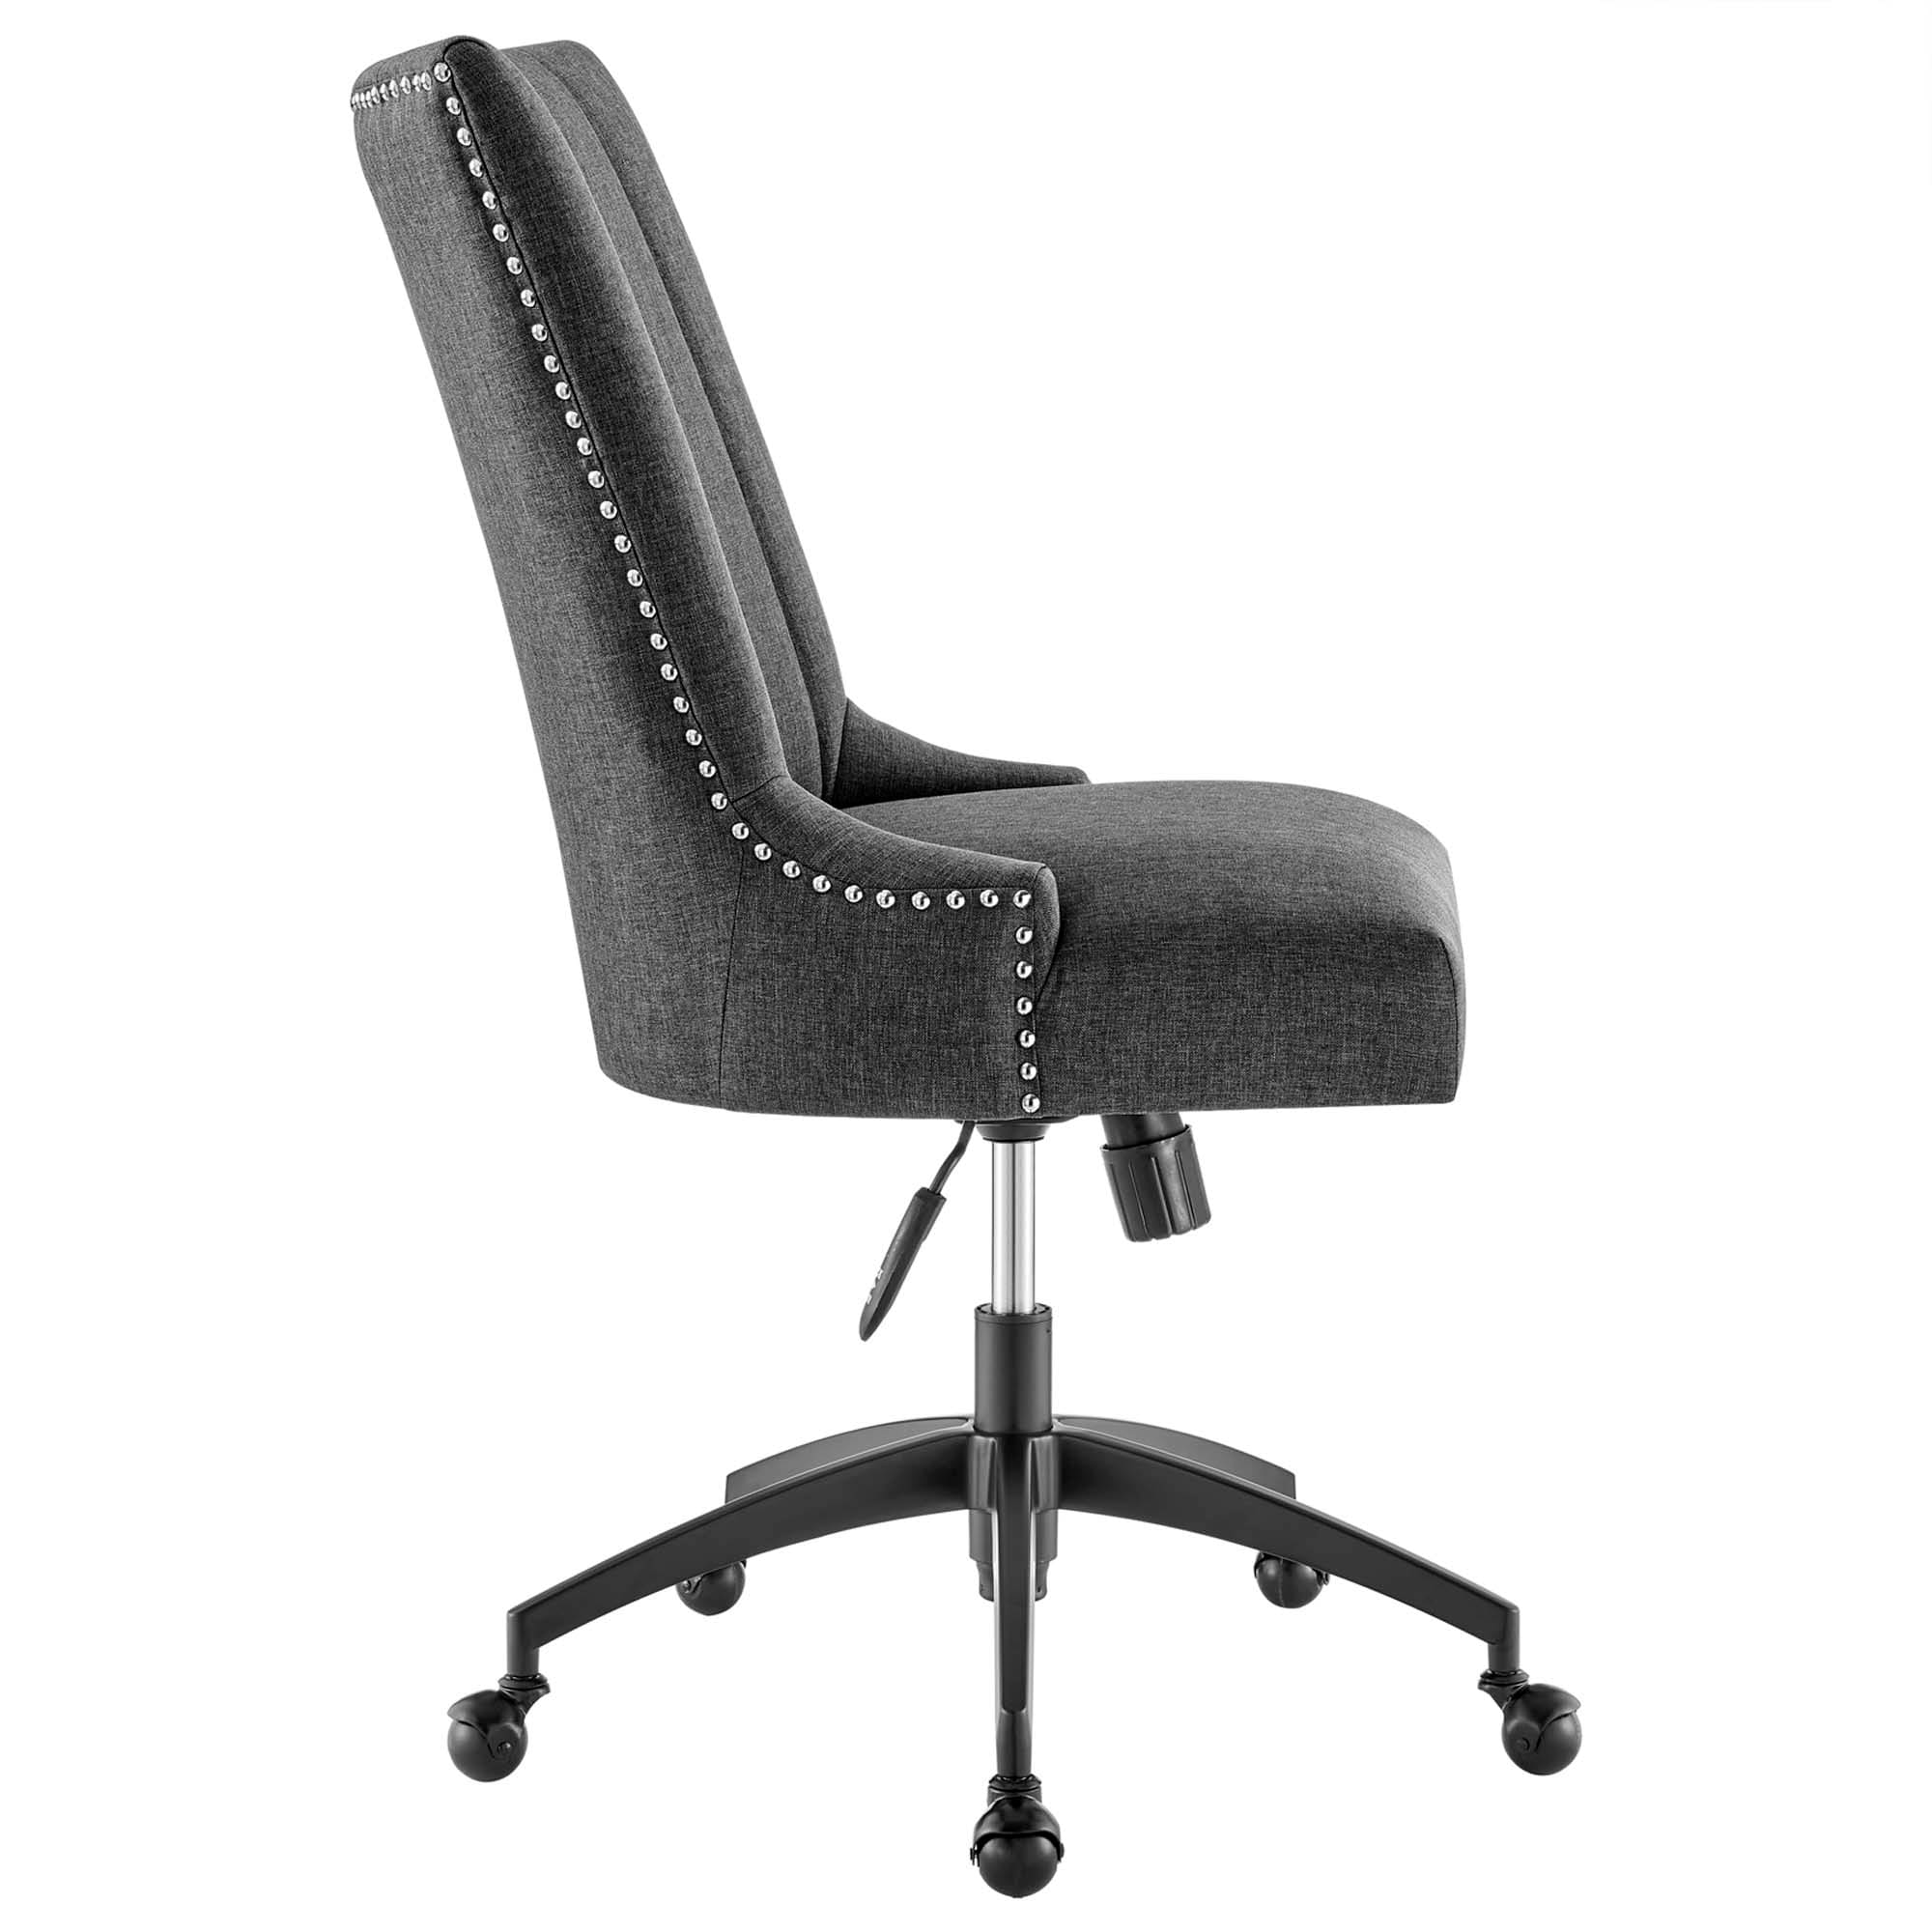 Modway Proceed Mid Back Upholstered Fabric Office Chair in Black 